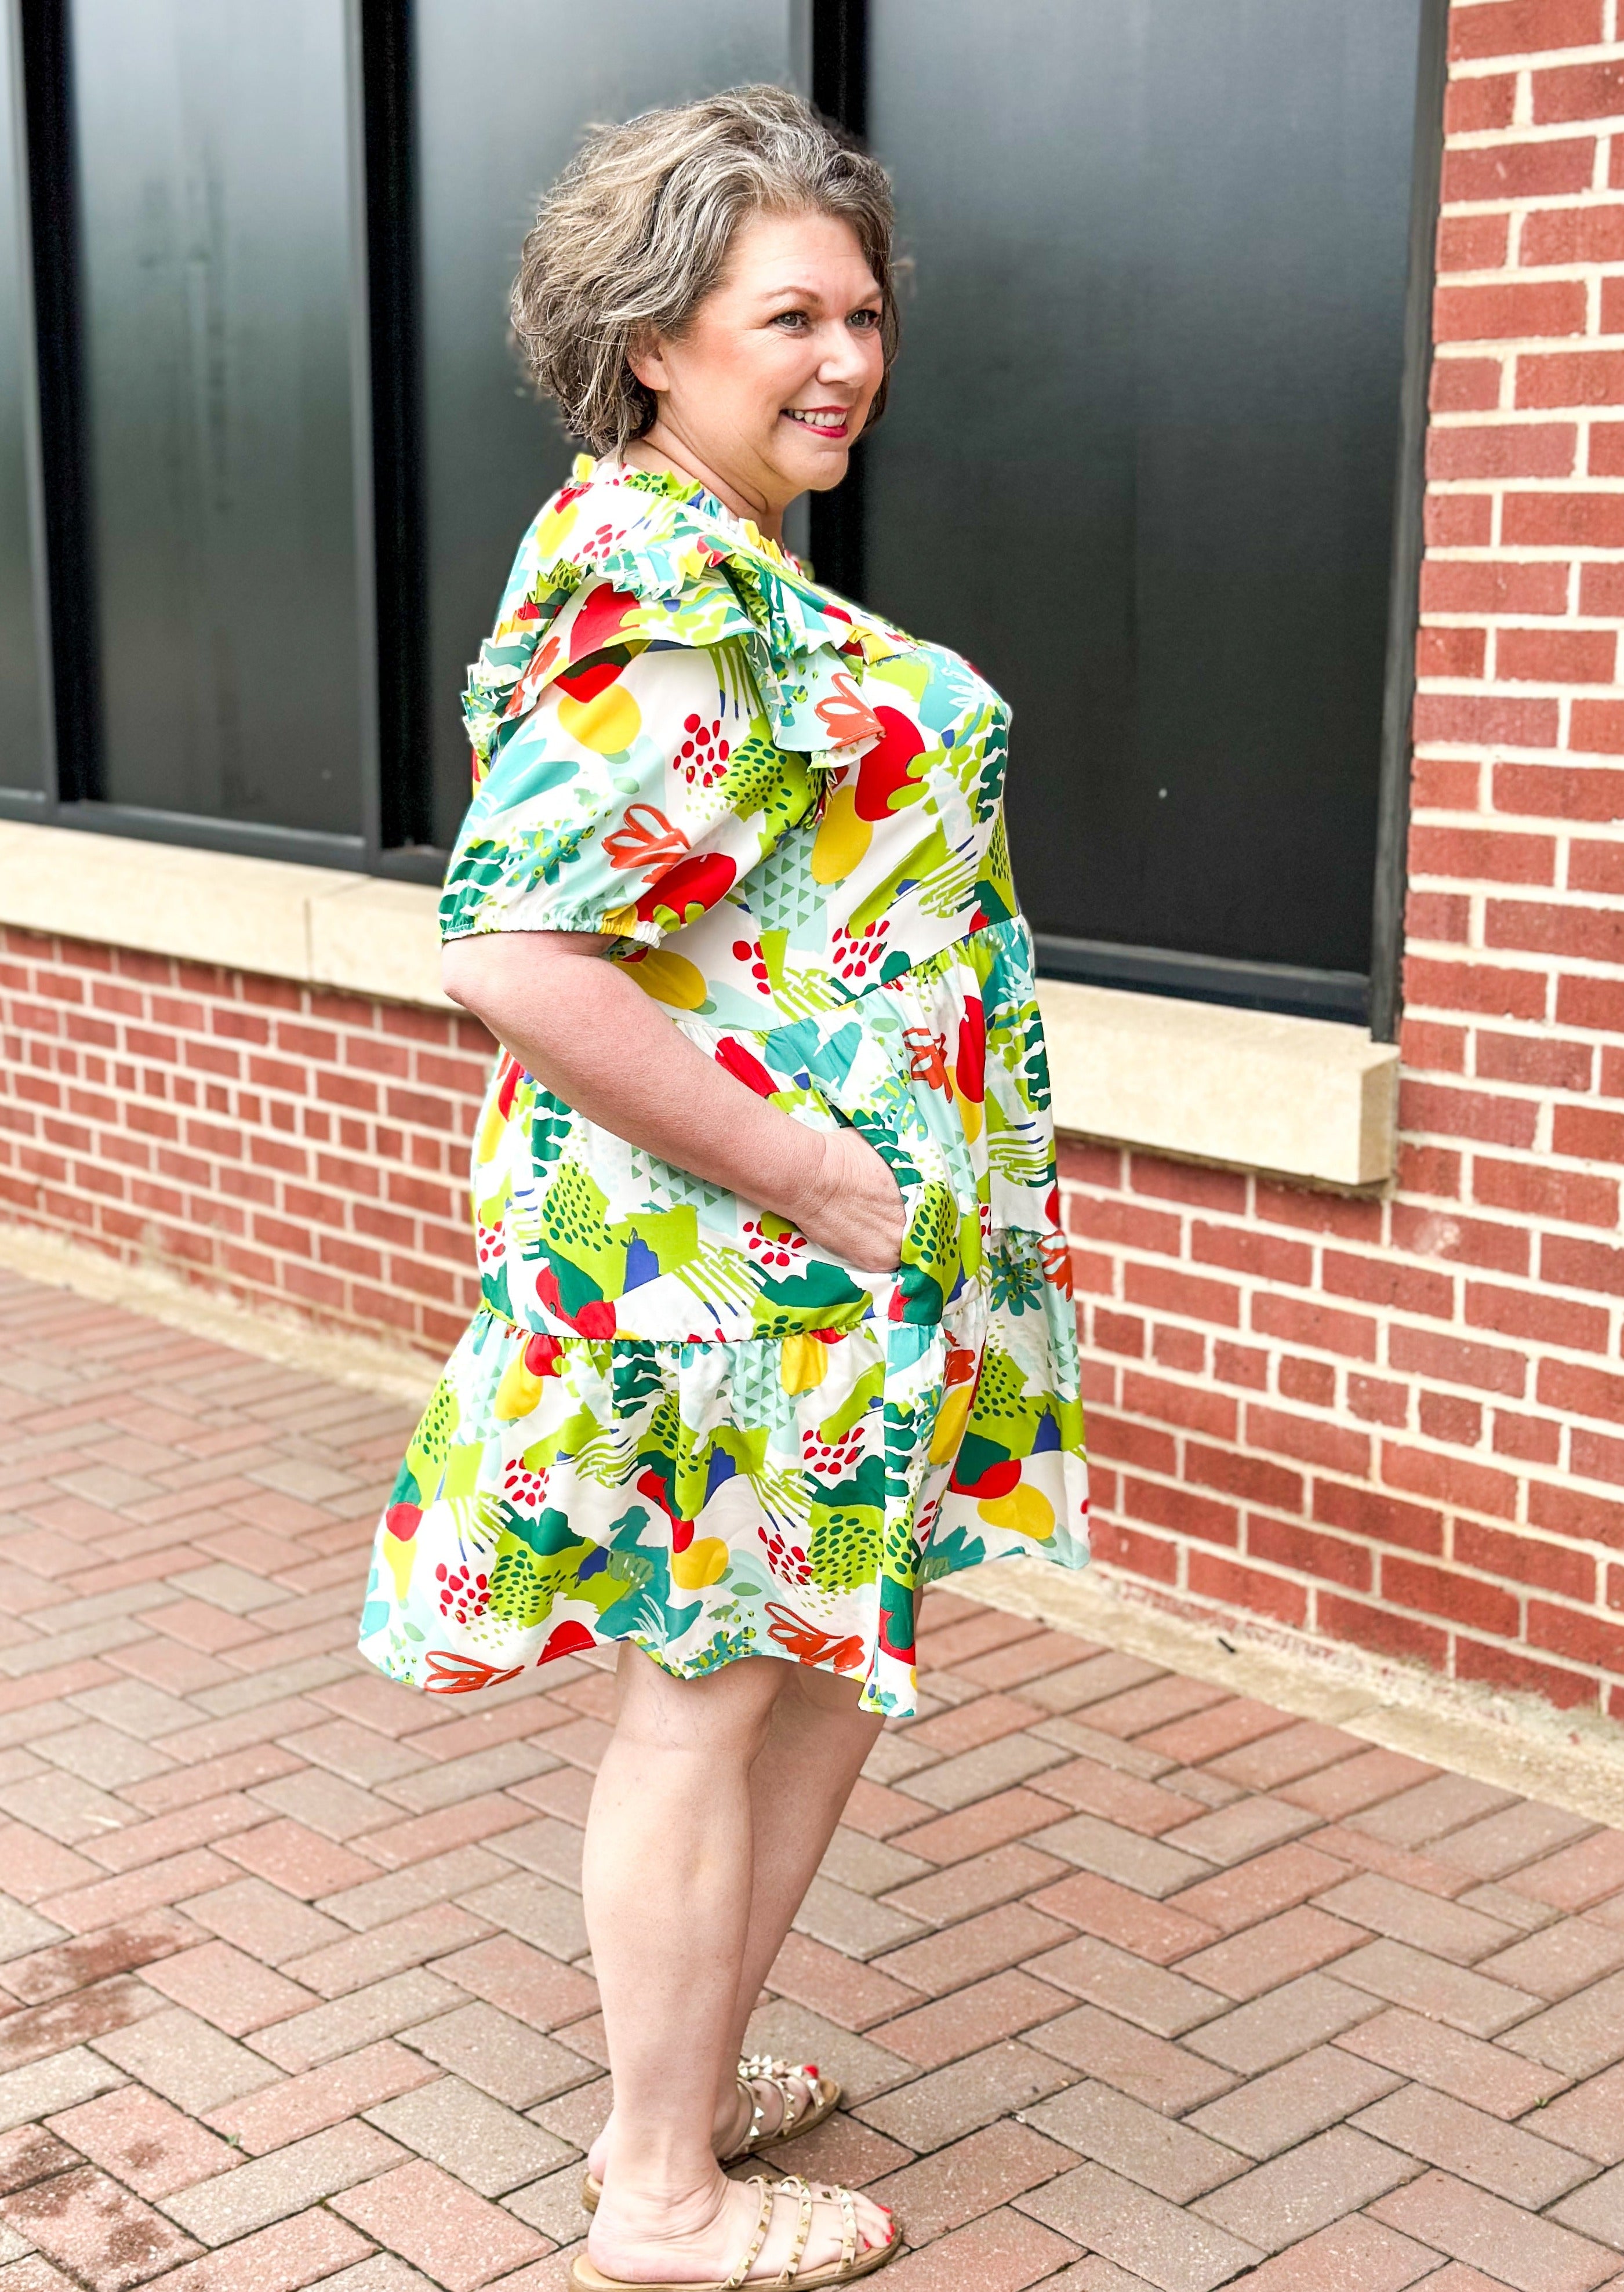 Greens, red, yellow, teal abstract print on white background dress - ruffle neck and ruffle on shoulder of short balloon sleeve - tiered